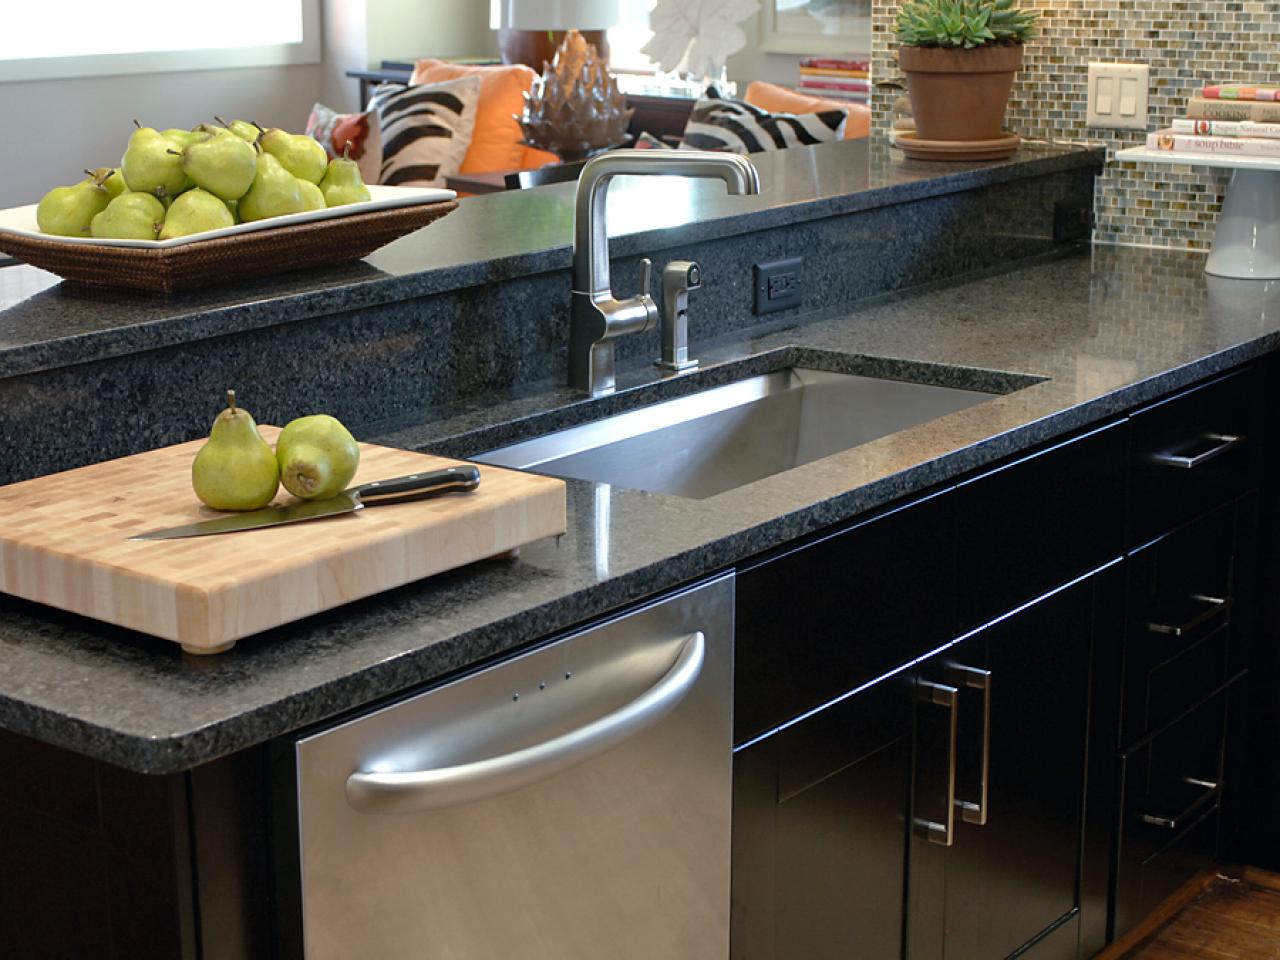 Choosing The Right Kitchen Sink And Faucet Hgtv in Brilliant and Interesting kitchen sink and faucet ideas for Existing Home